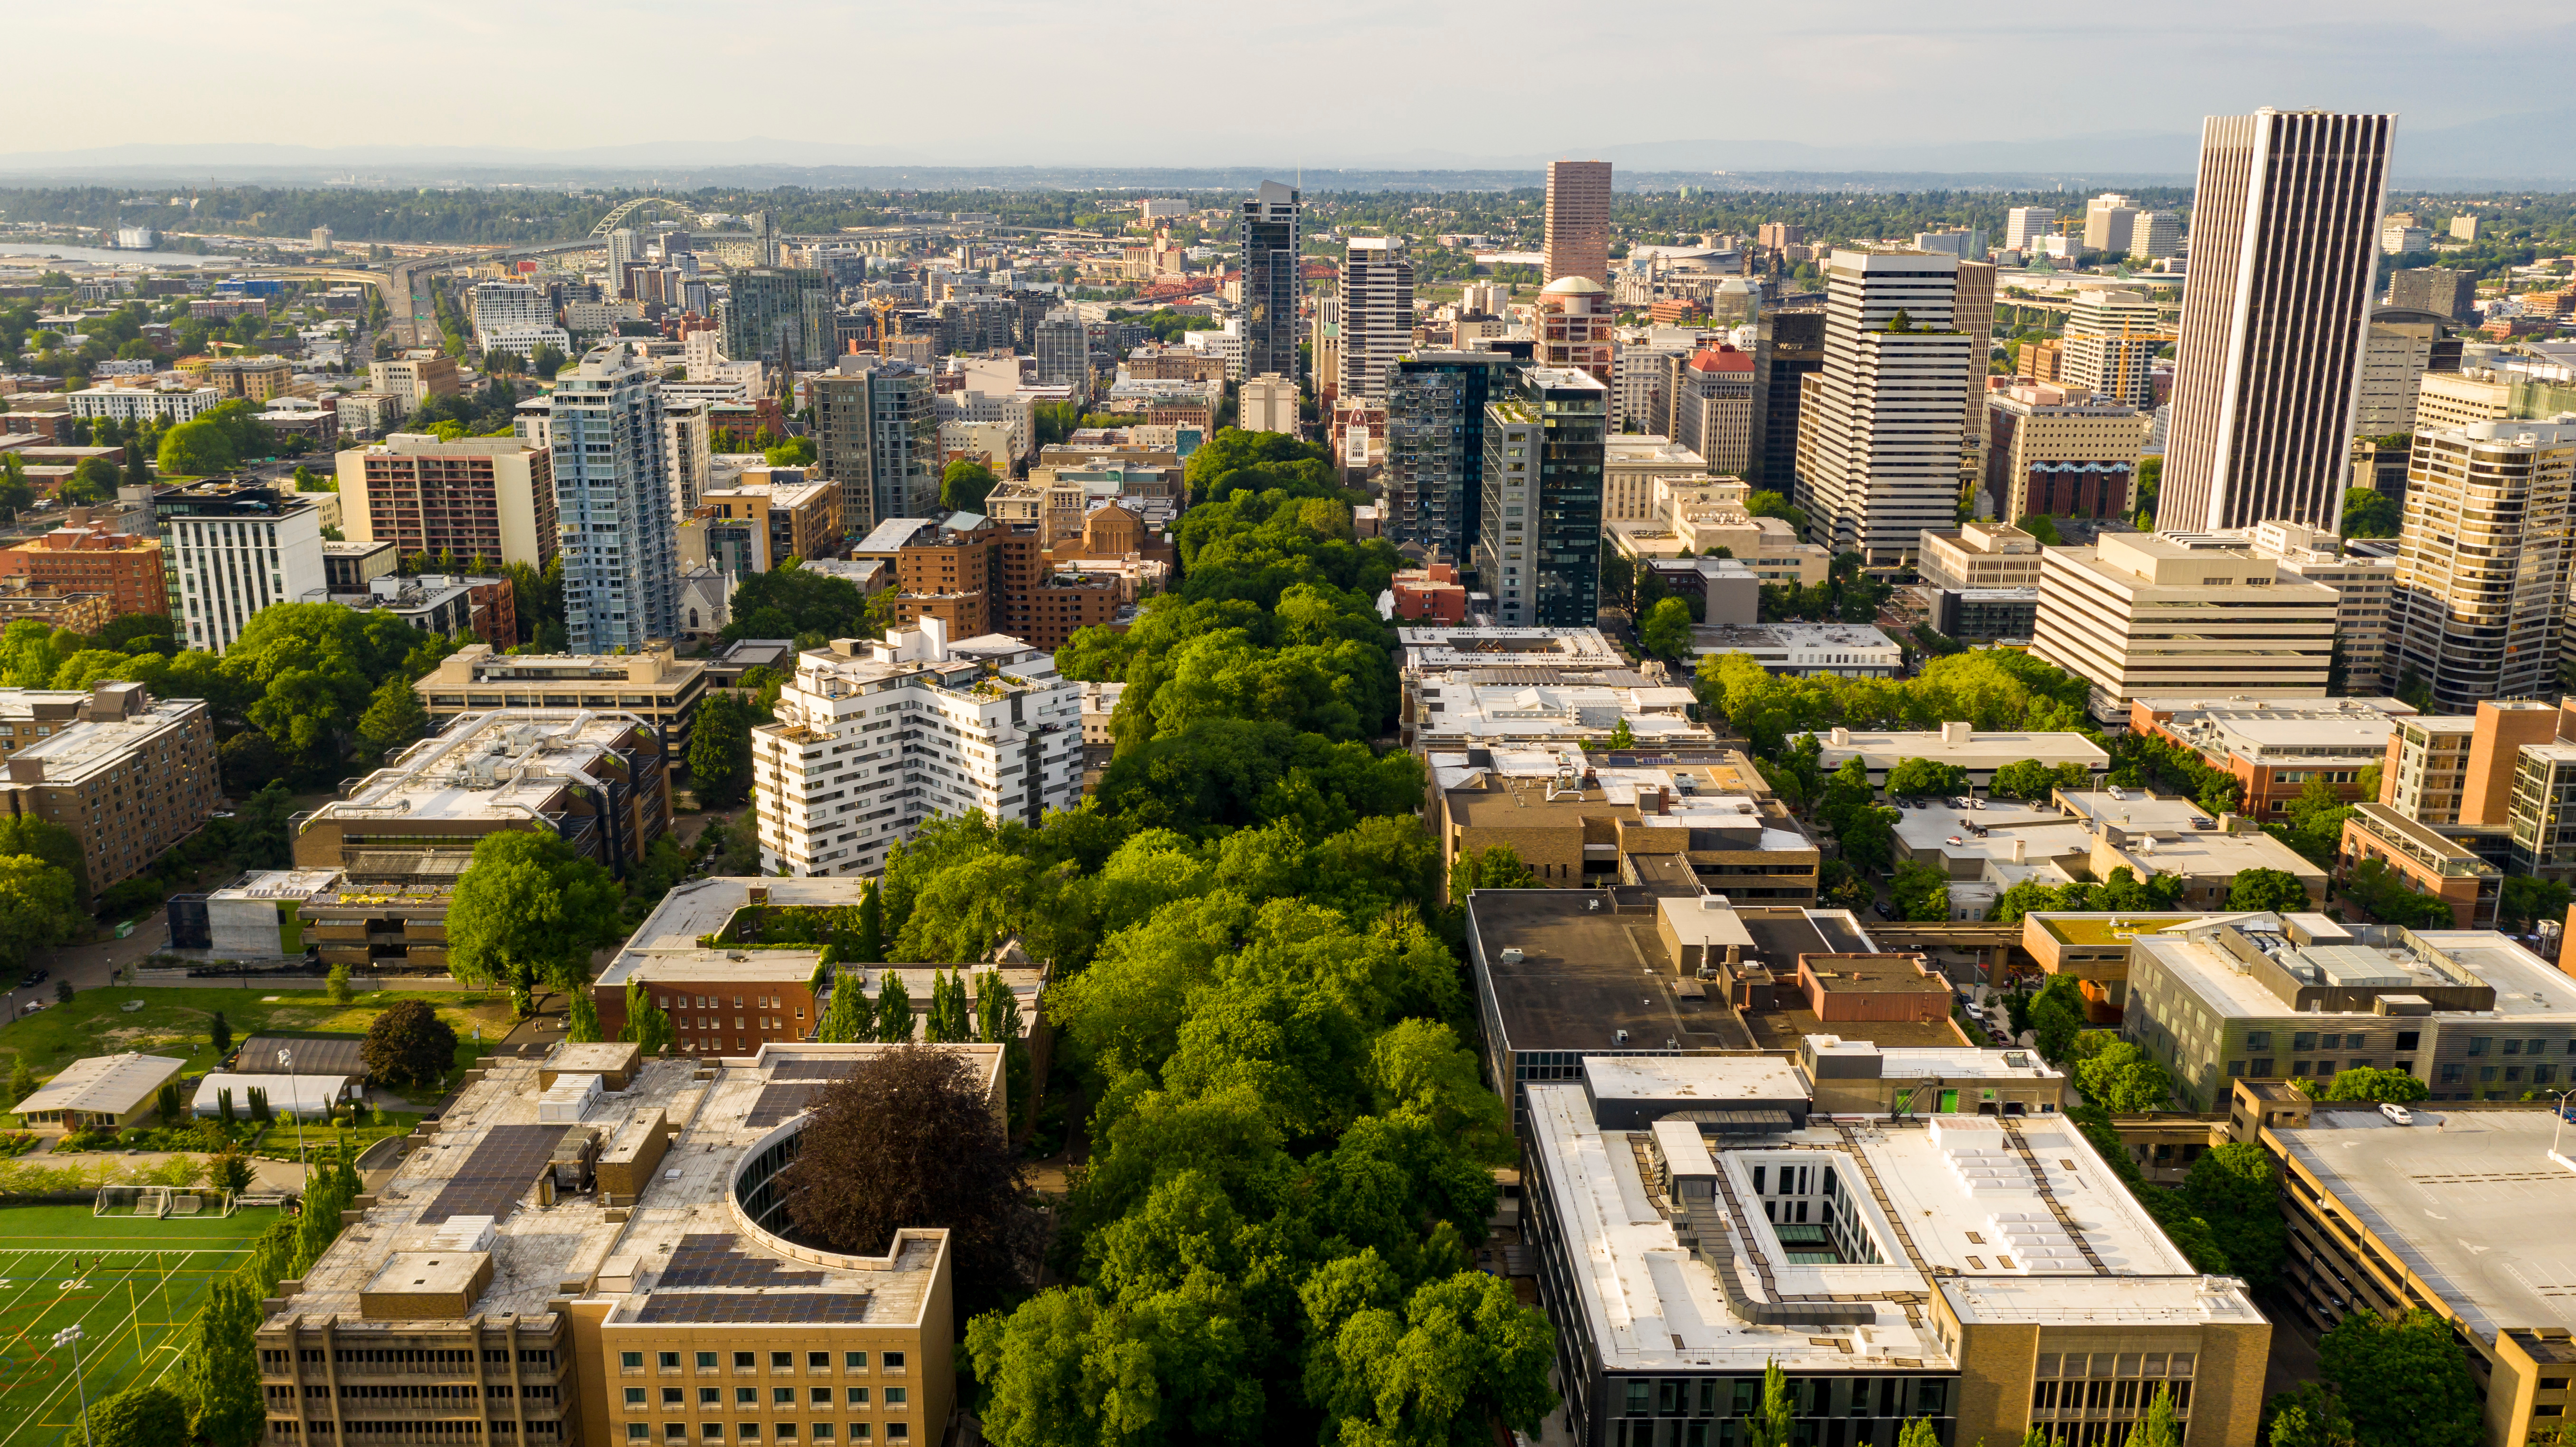 The PSU campus and park blocks seen from a sky view.